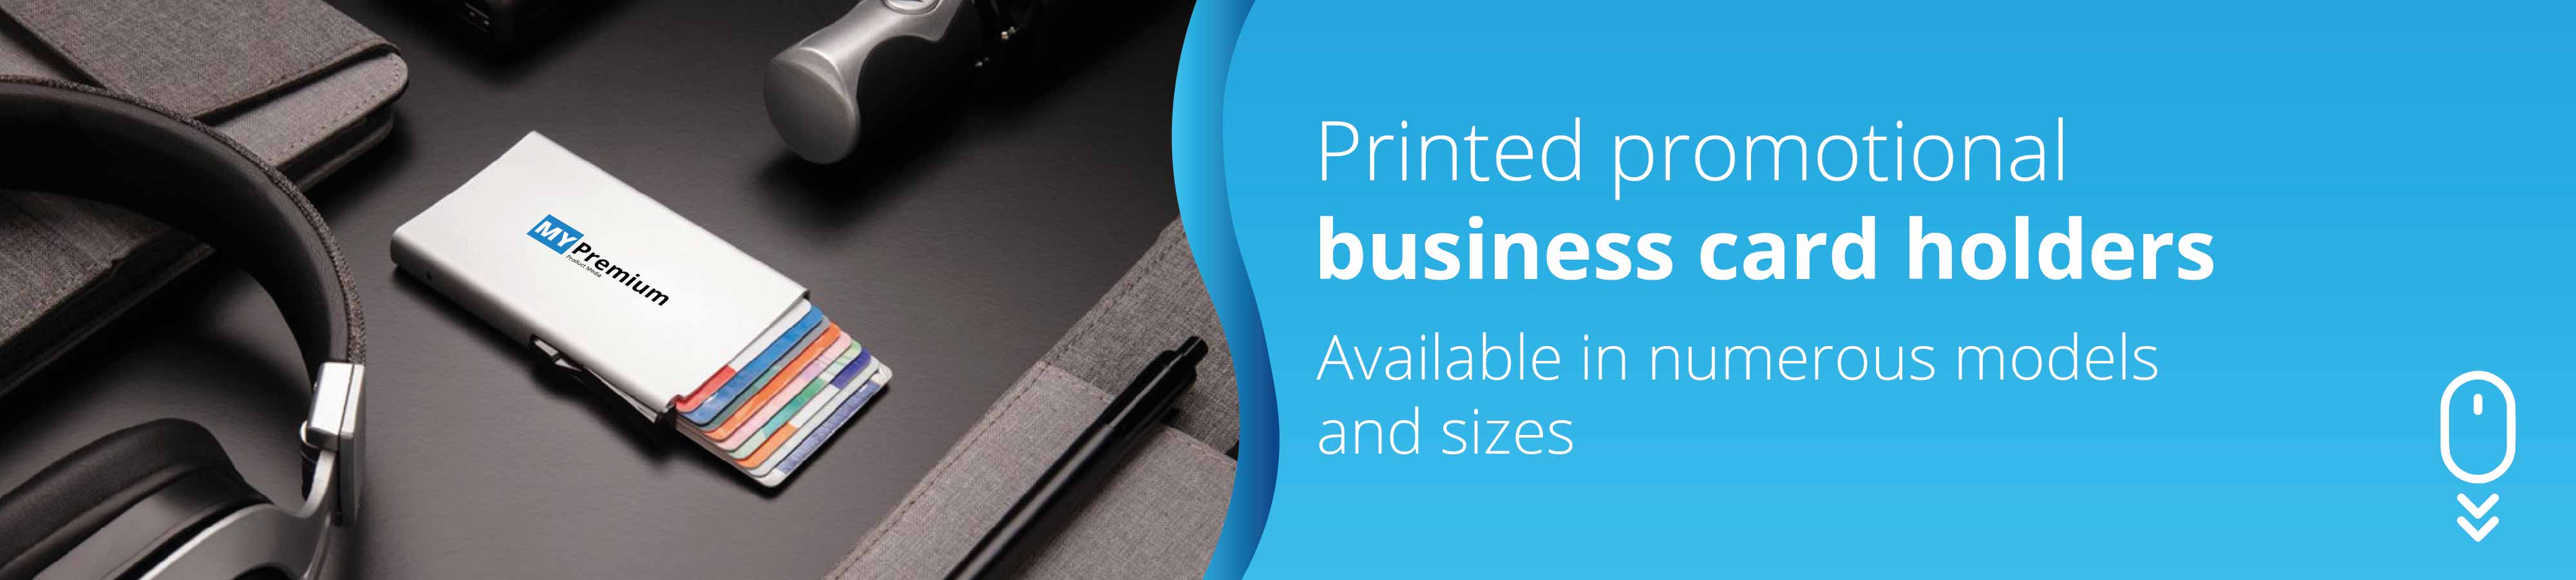 printed-promotional-business-card-holders